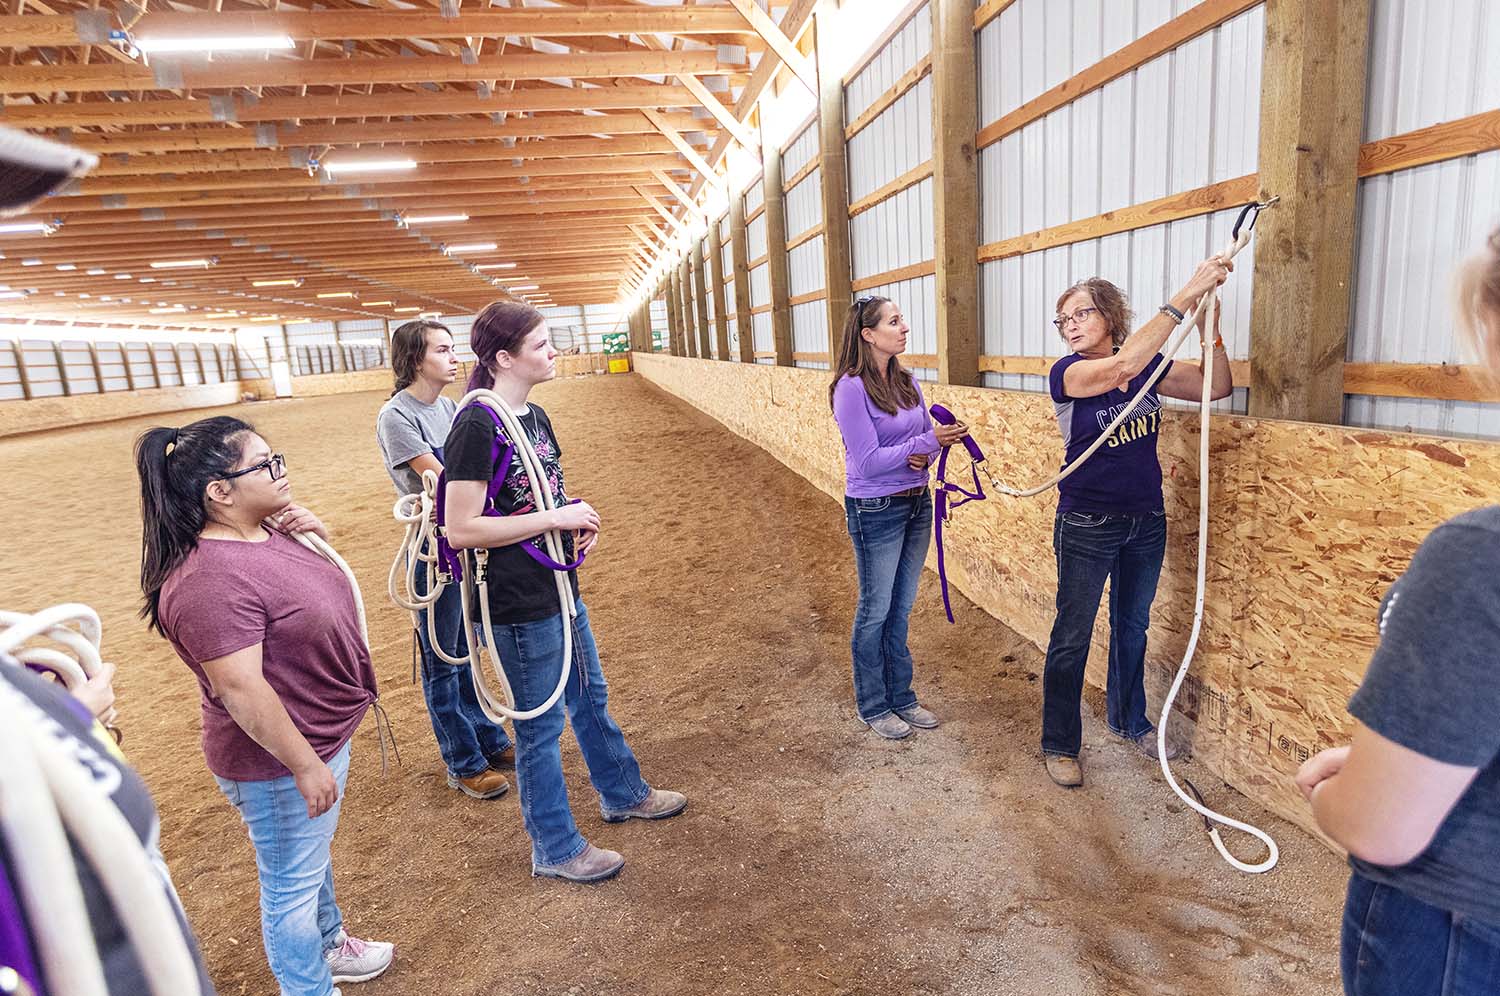 Professor and students in a horse stable during an Anthrozoology class